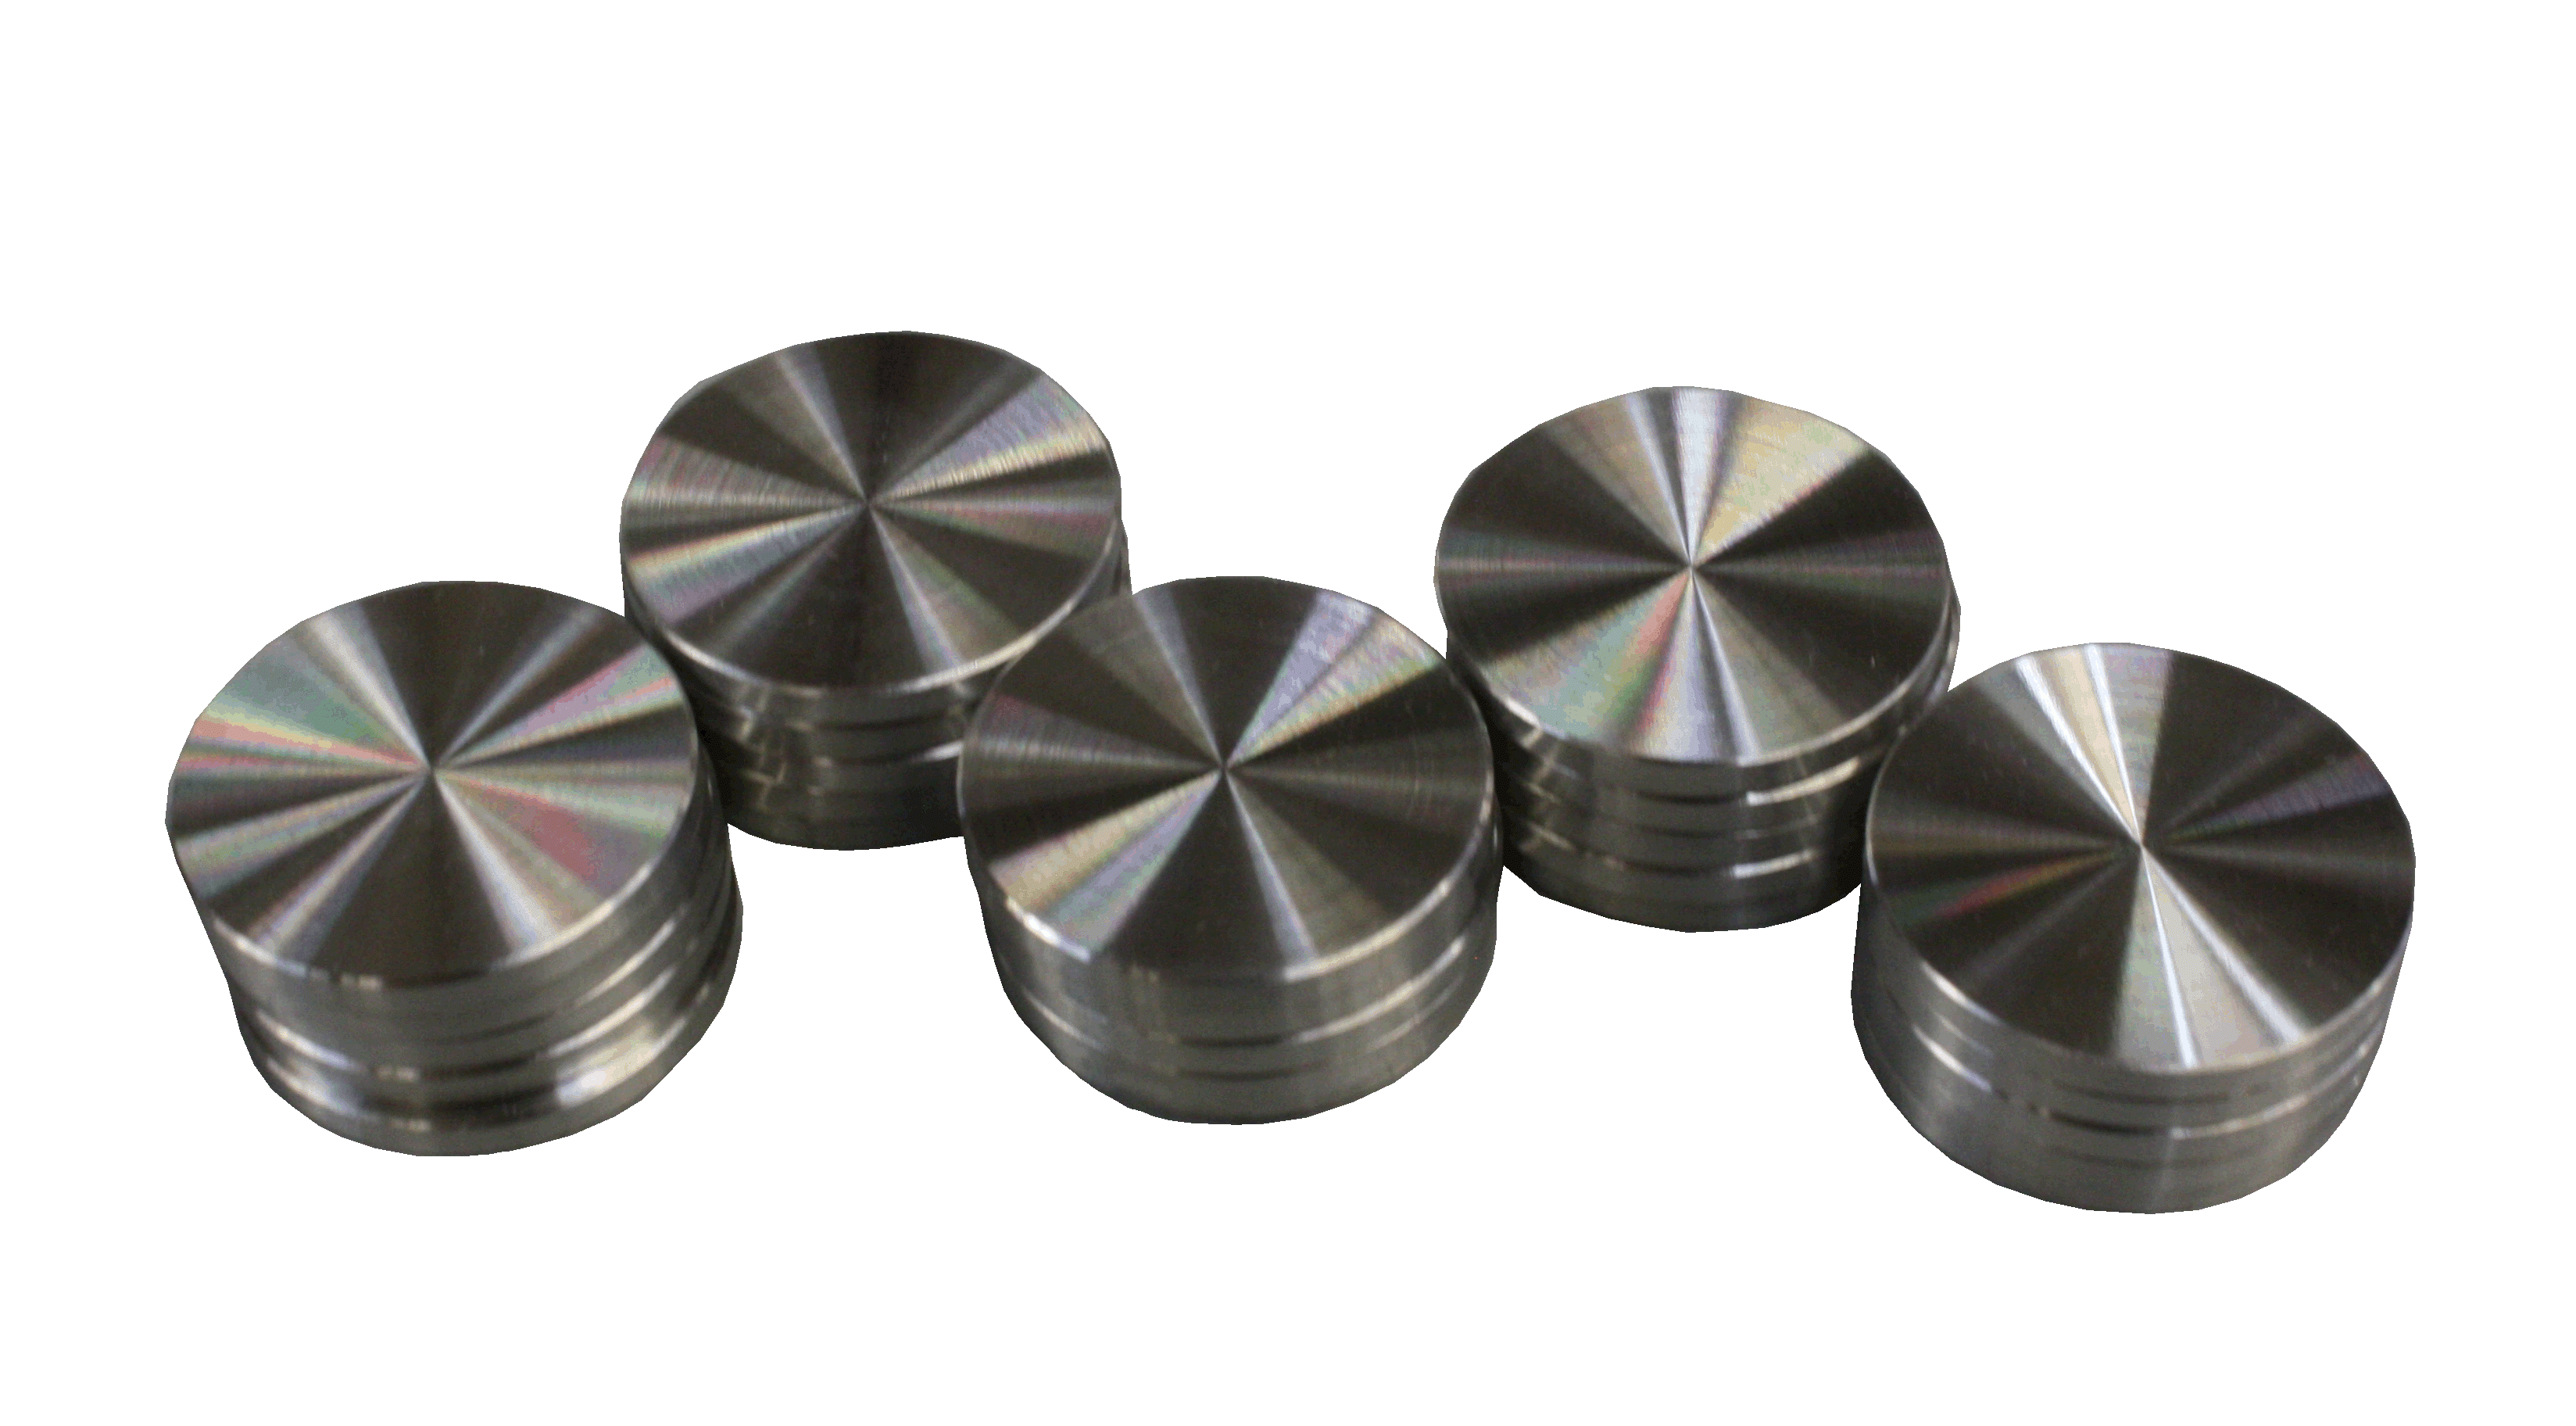 Stainless Steel Discs (pack of 25)